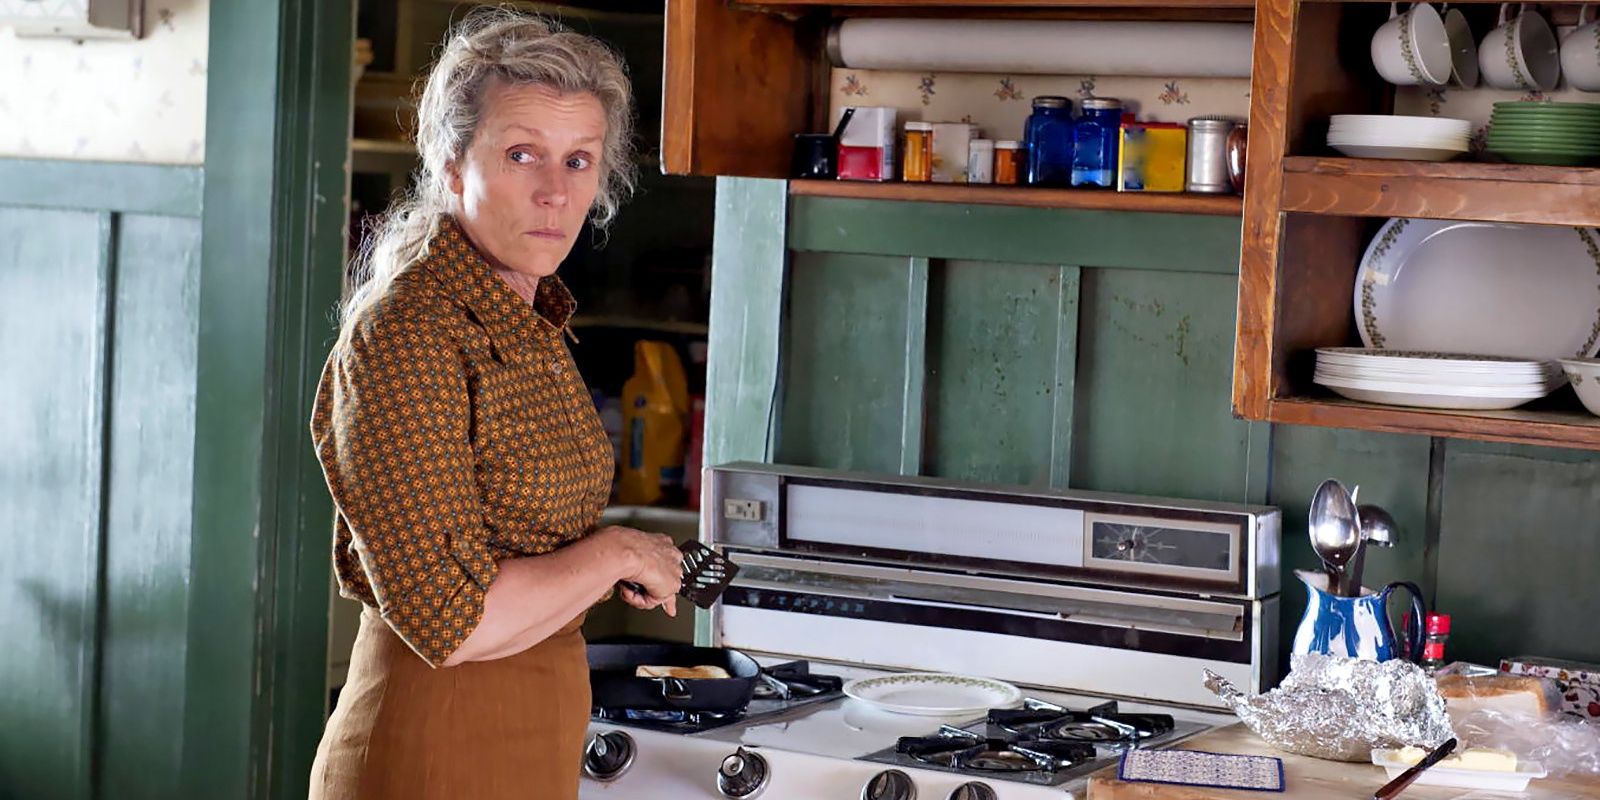 Frances McDormand stands at an oven in Olive Kitteridge